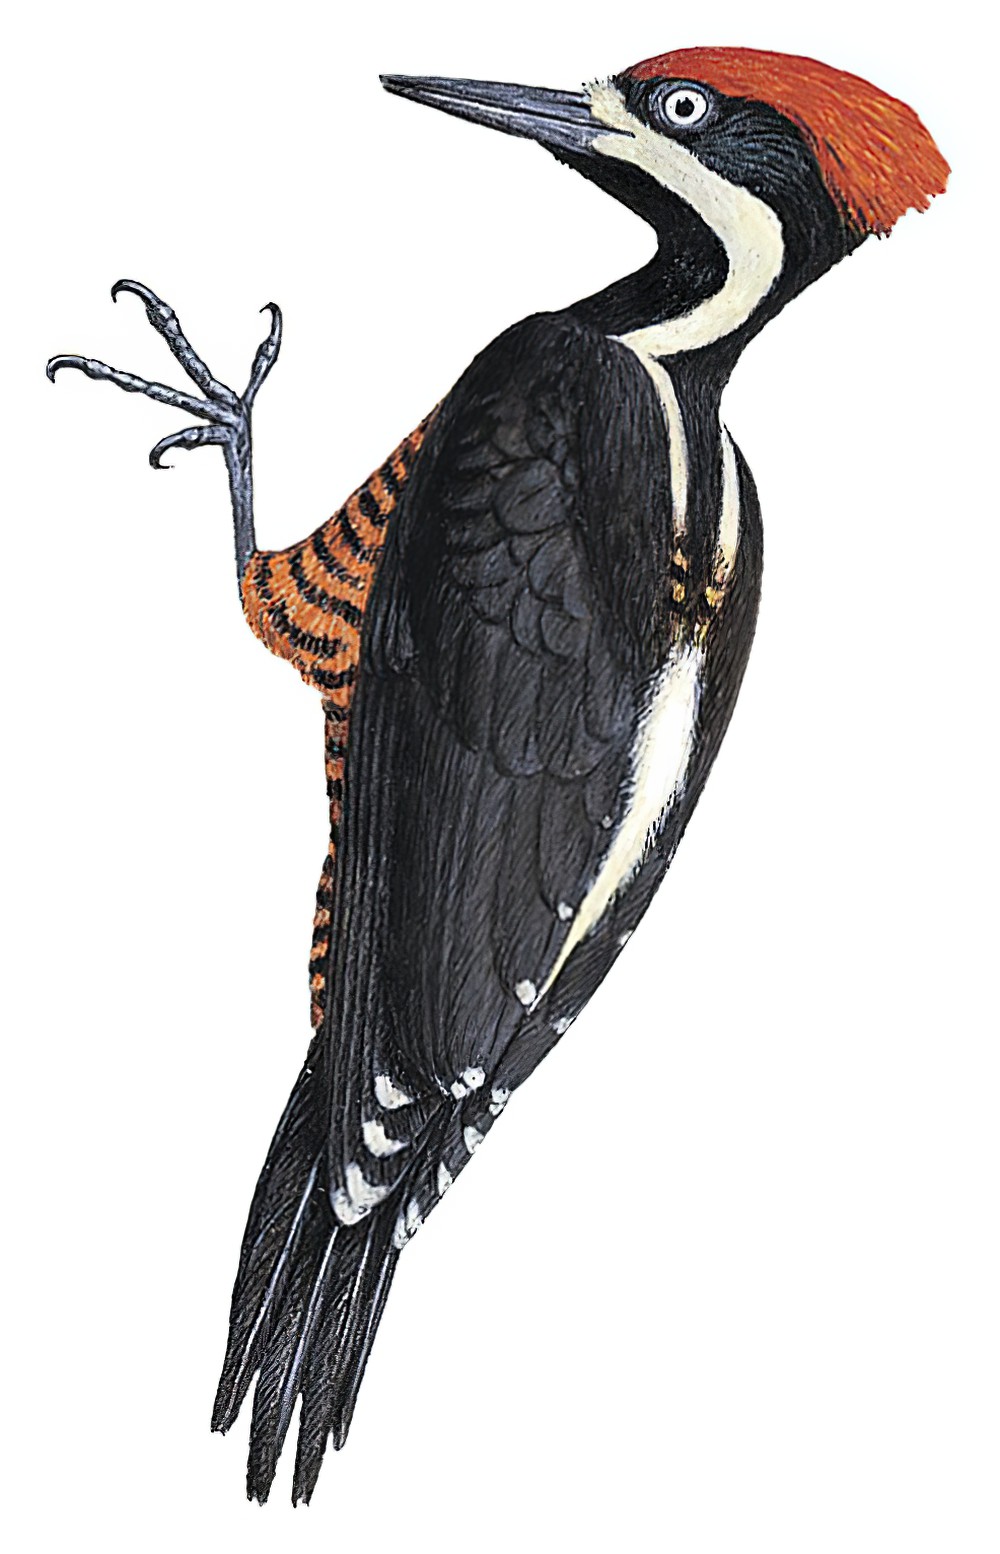 Powerful Woodpecker / Campephilus pollens